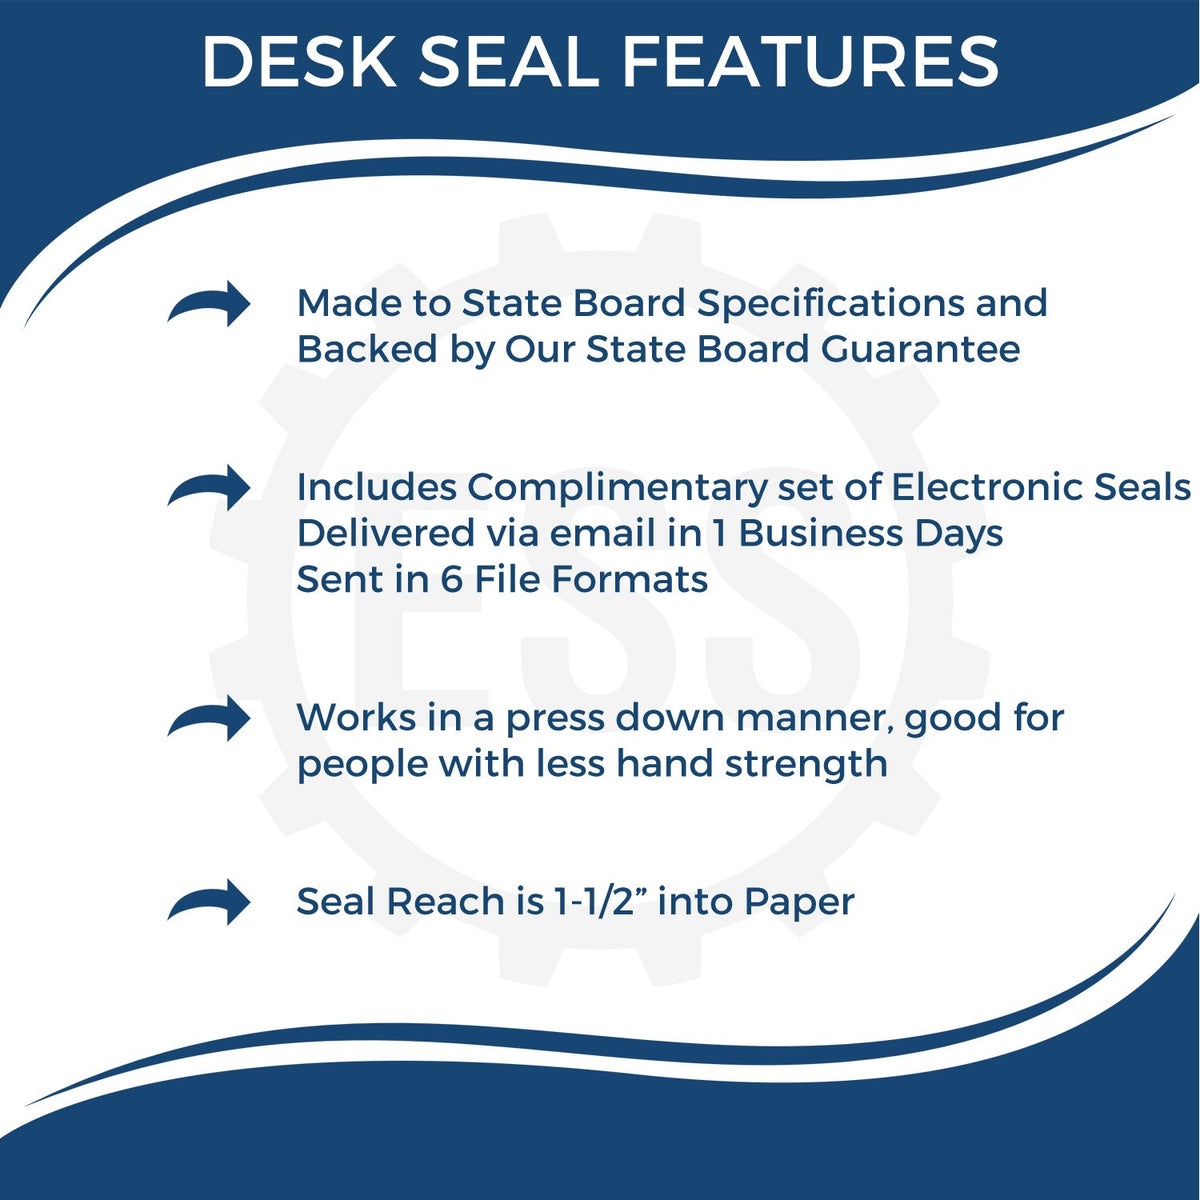 A picture of an infographic highlighting the selling points for the Michigan Desk Architect Embossing Seal